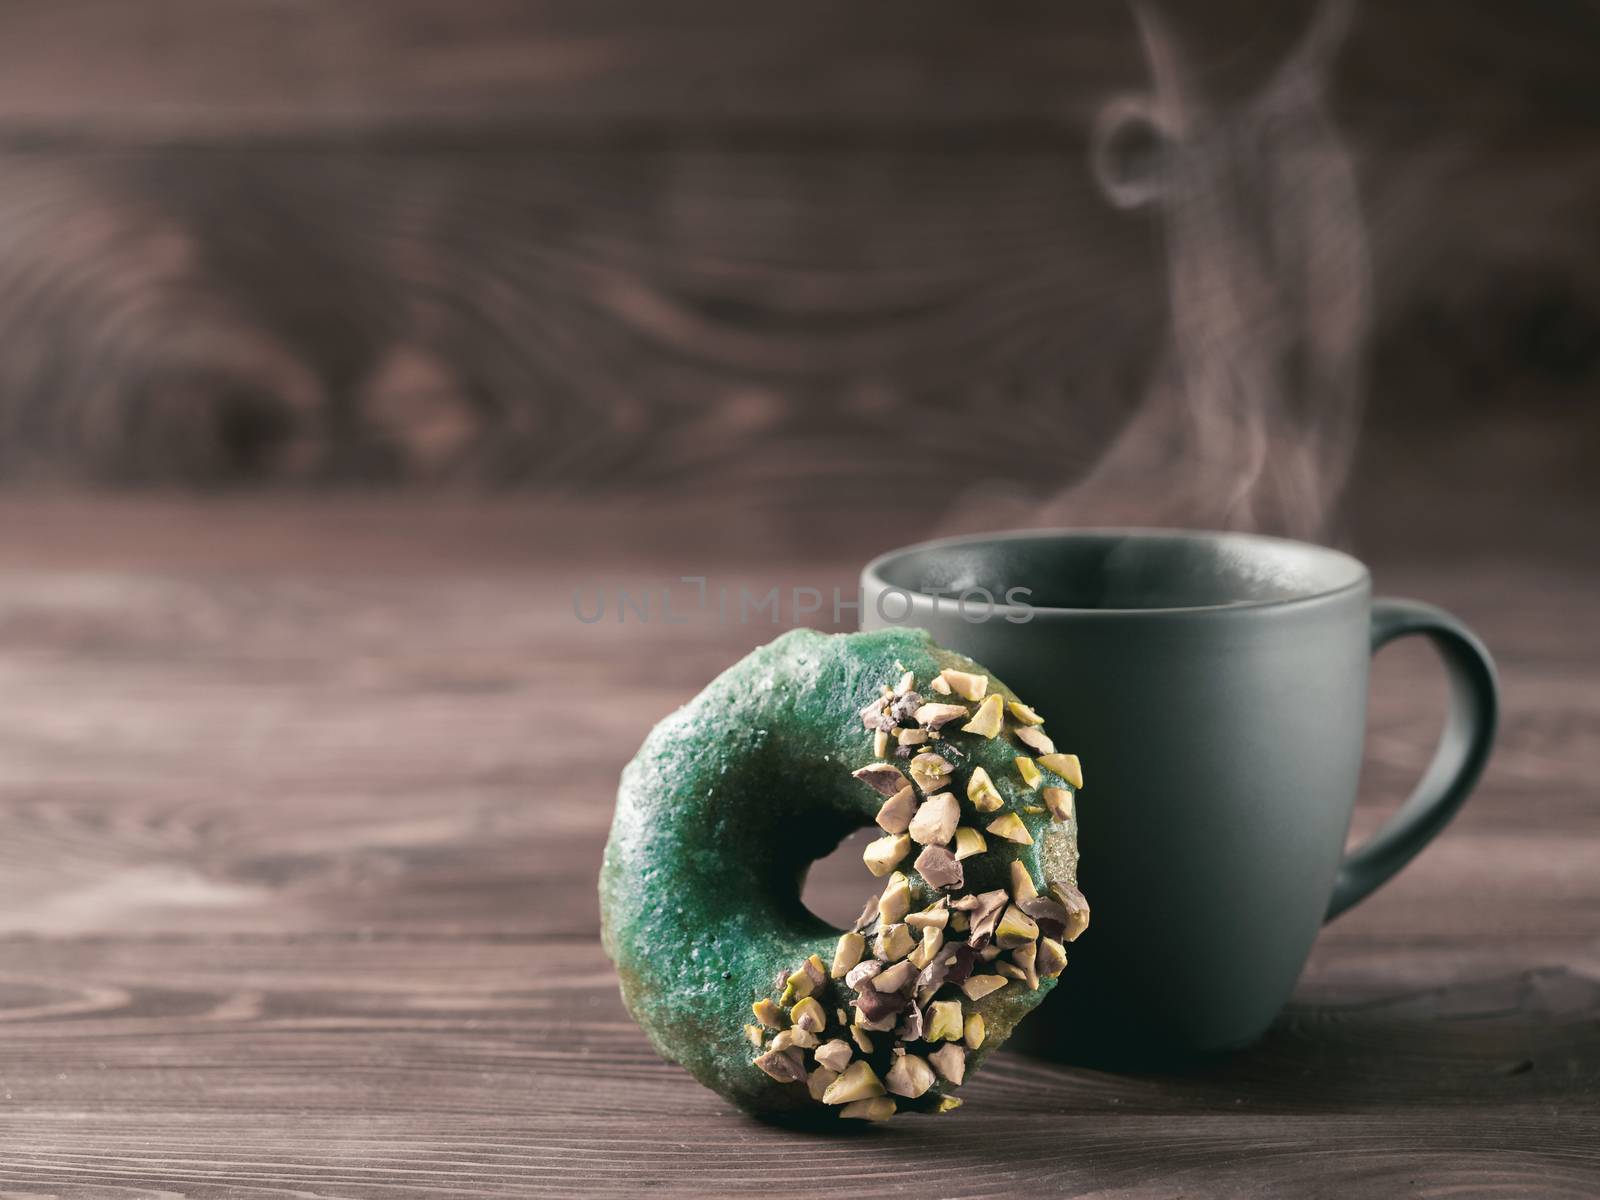 Vegan doughnuts with chia seeds topped with healthy spirulina glaze with pistachio. Blue green spirulina donuts, hot herbal tea cup with steam on brown wooden table. Copy space for text